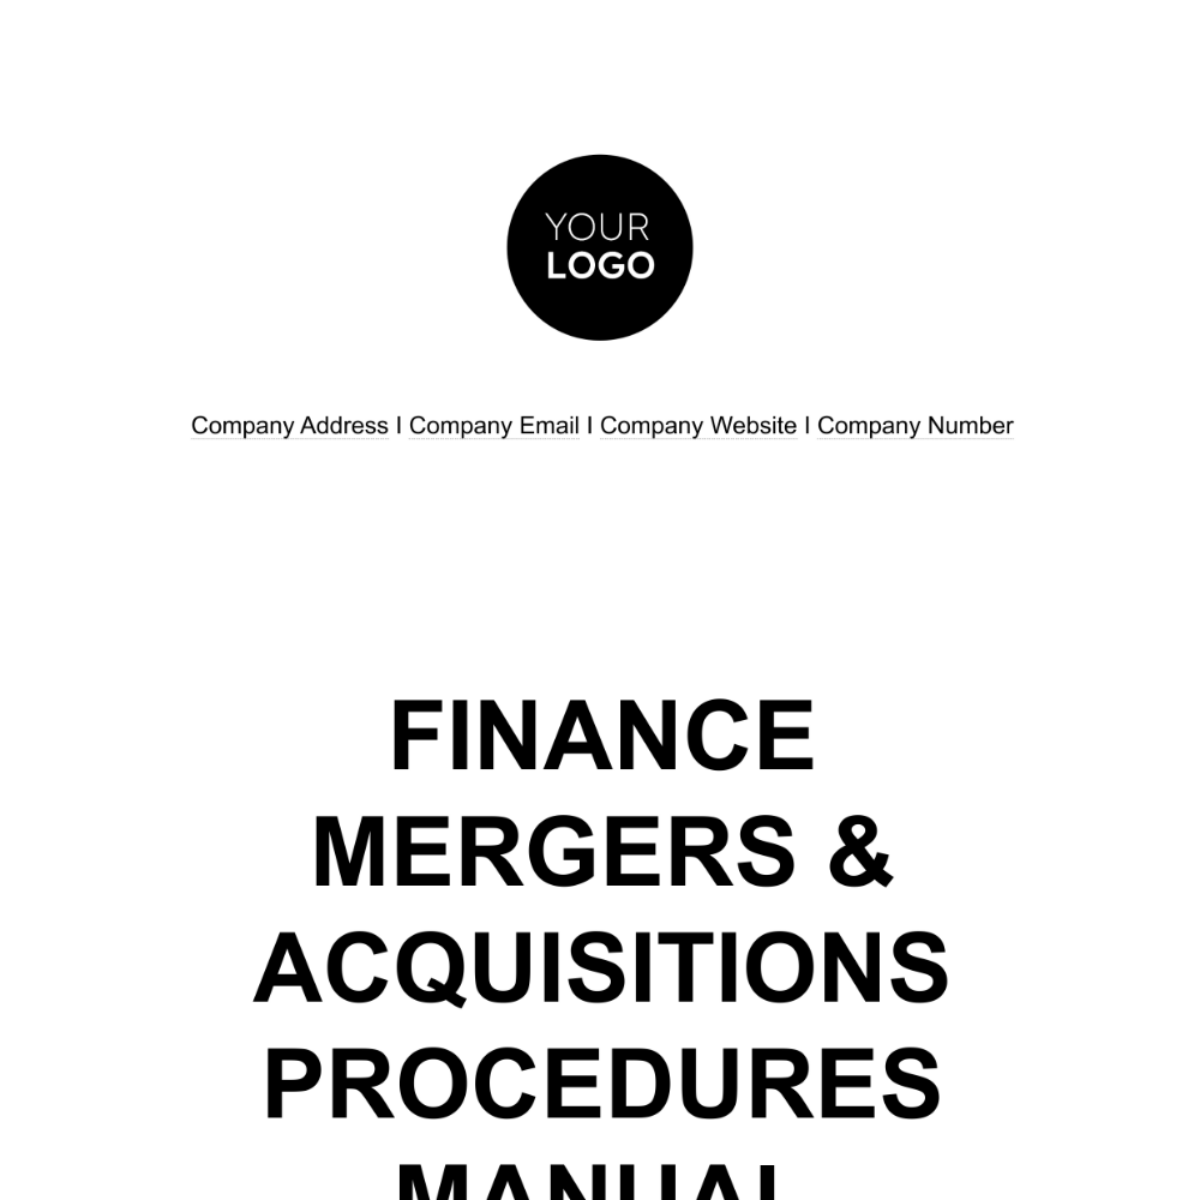 Free Finance Mergers & Acquisitions Procedures Manual Template